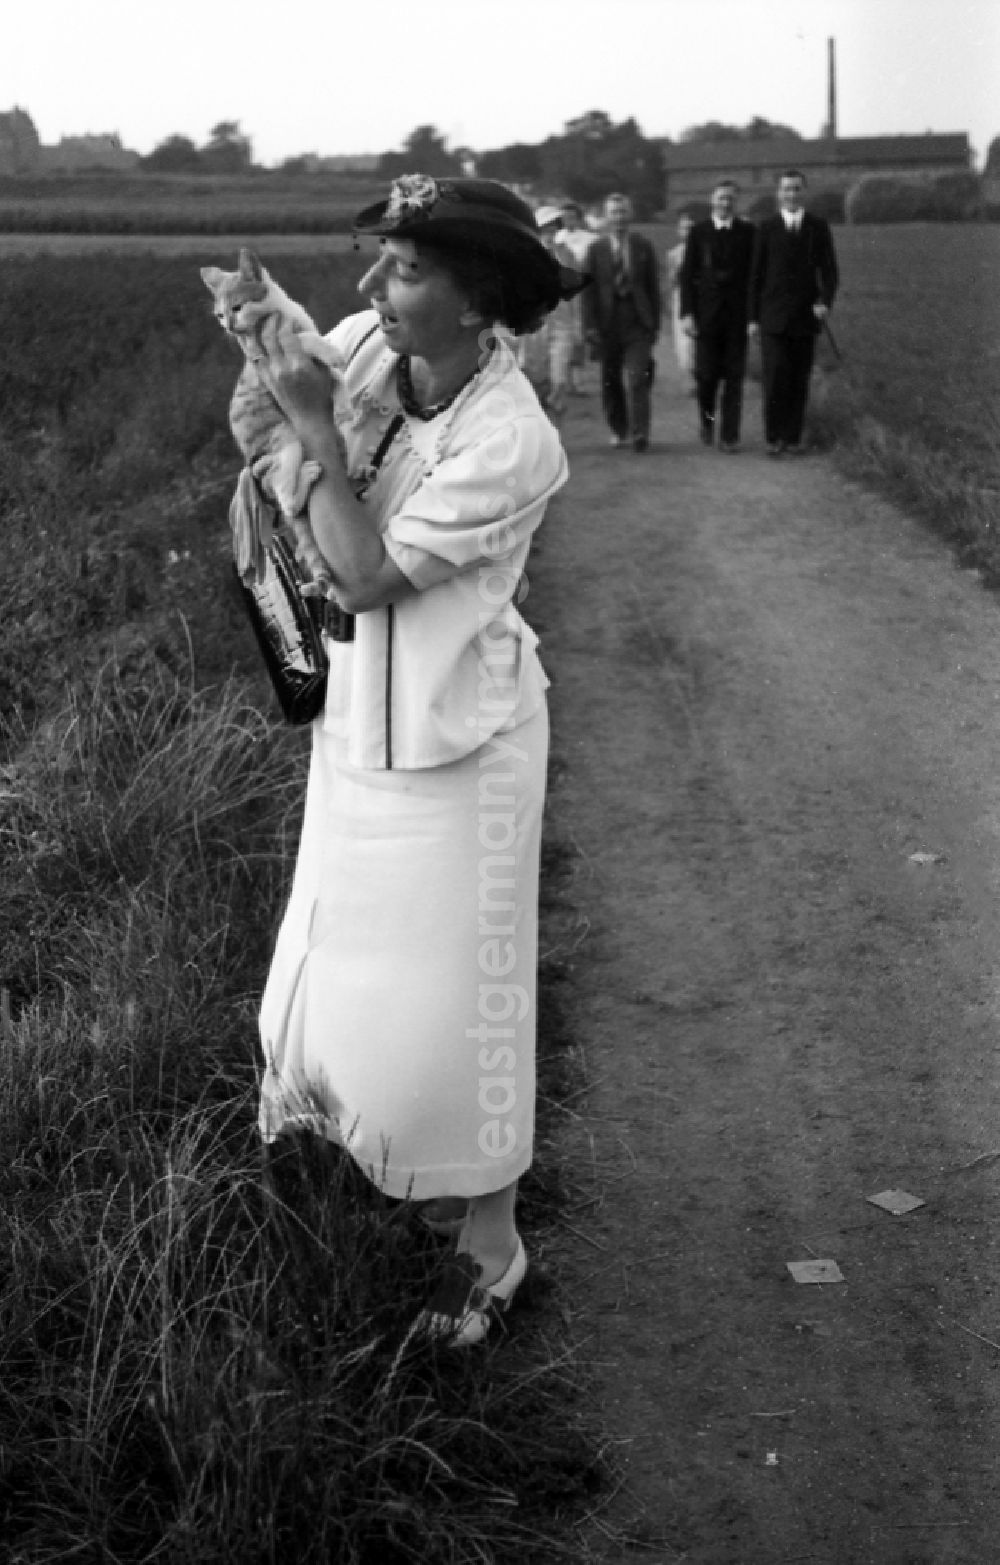 Leuna: Sunday walk in Leuna in the federal state Saxony-Anhalt in Germany. In the background the Leuna works. A woman holds a cat on the arm